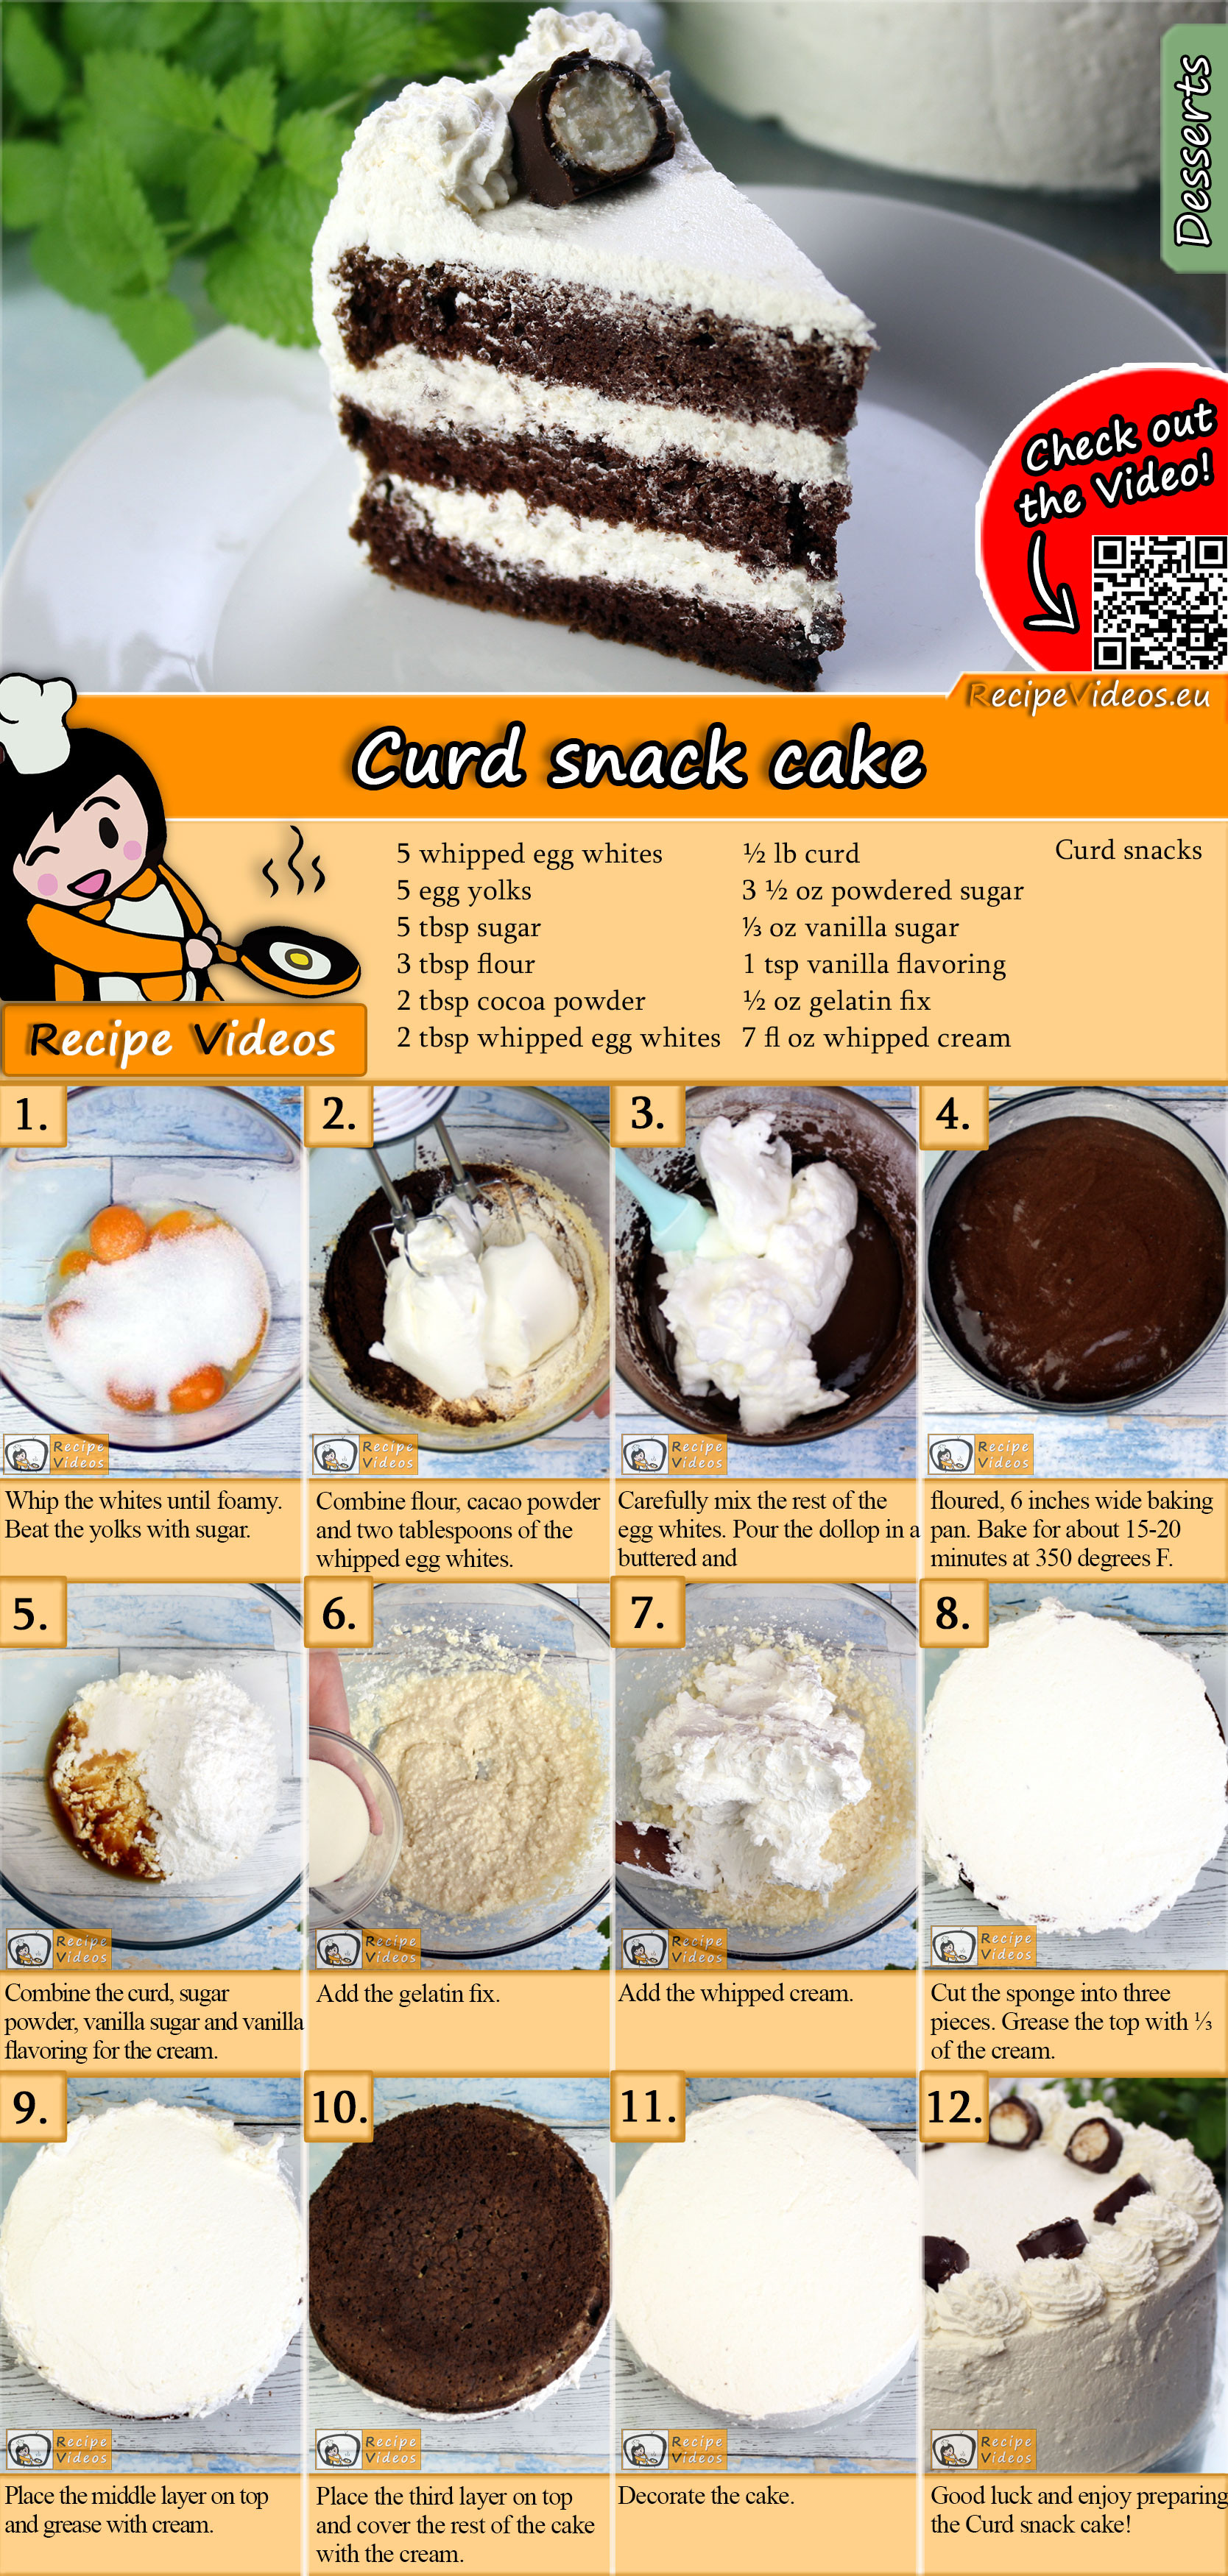 Curd snack cake recipe with video